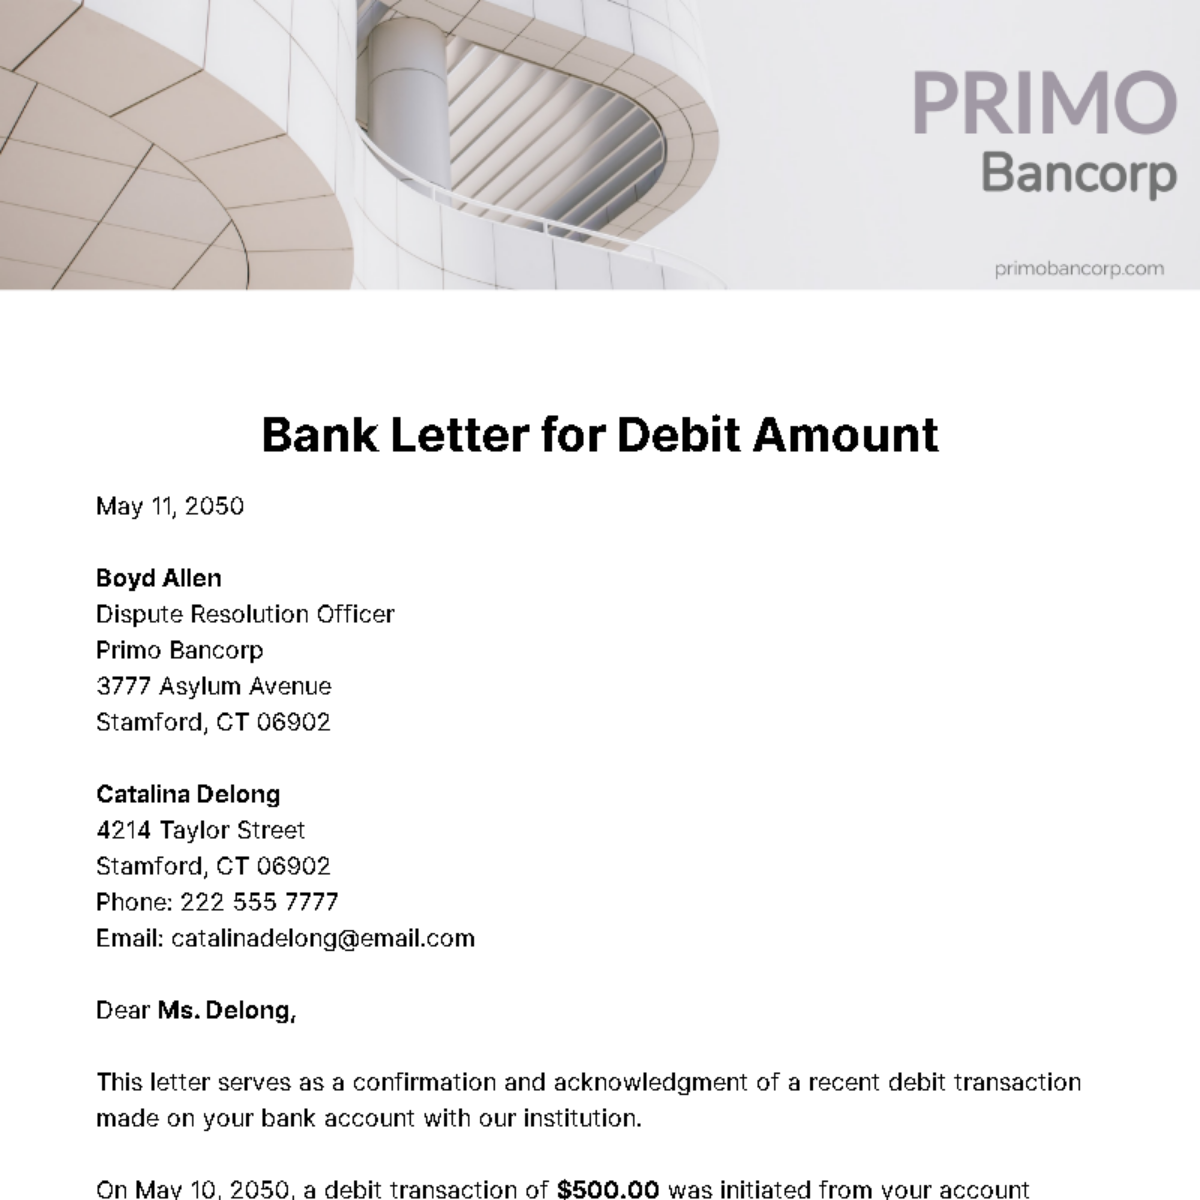 Bank Letter for Debit Amount Template